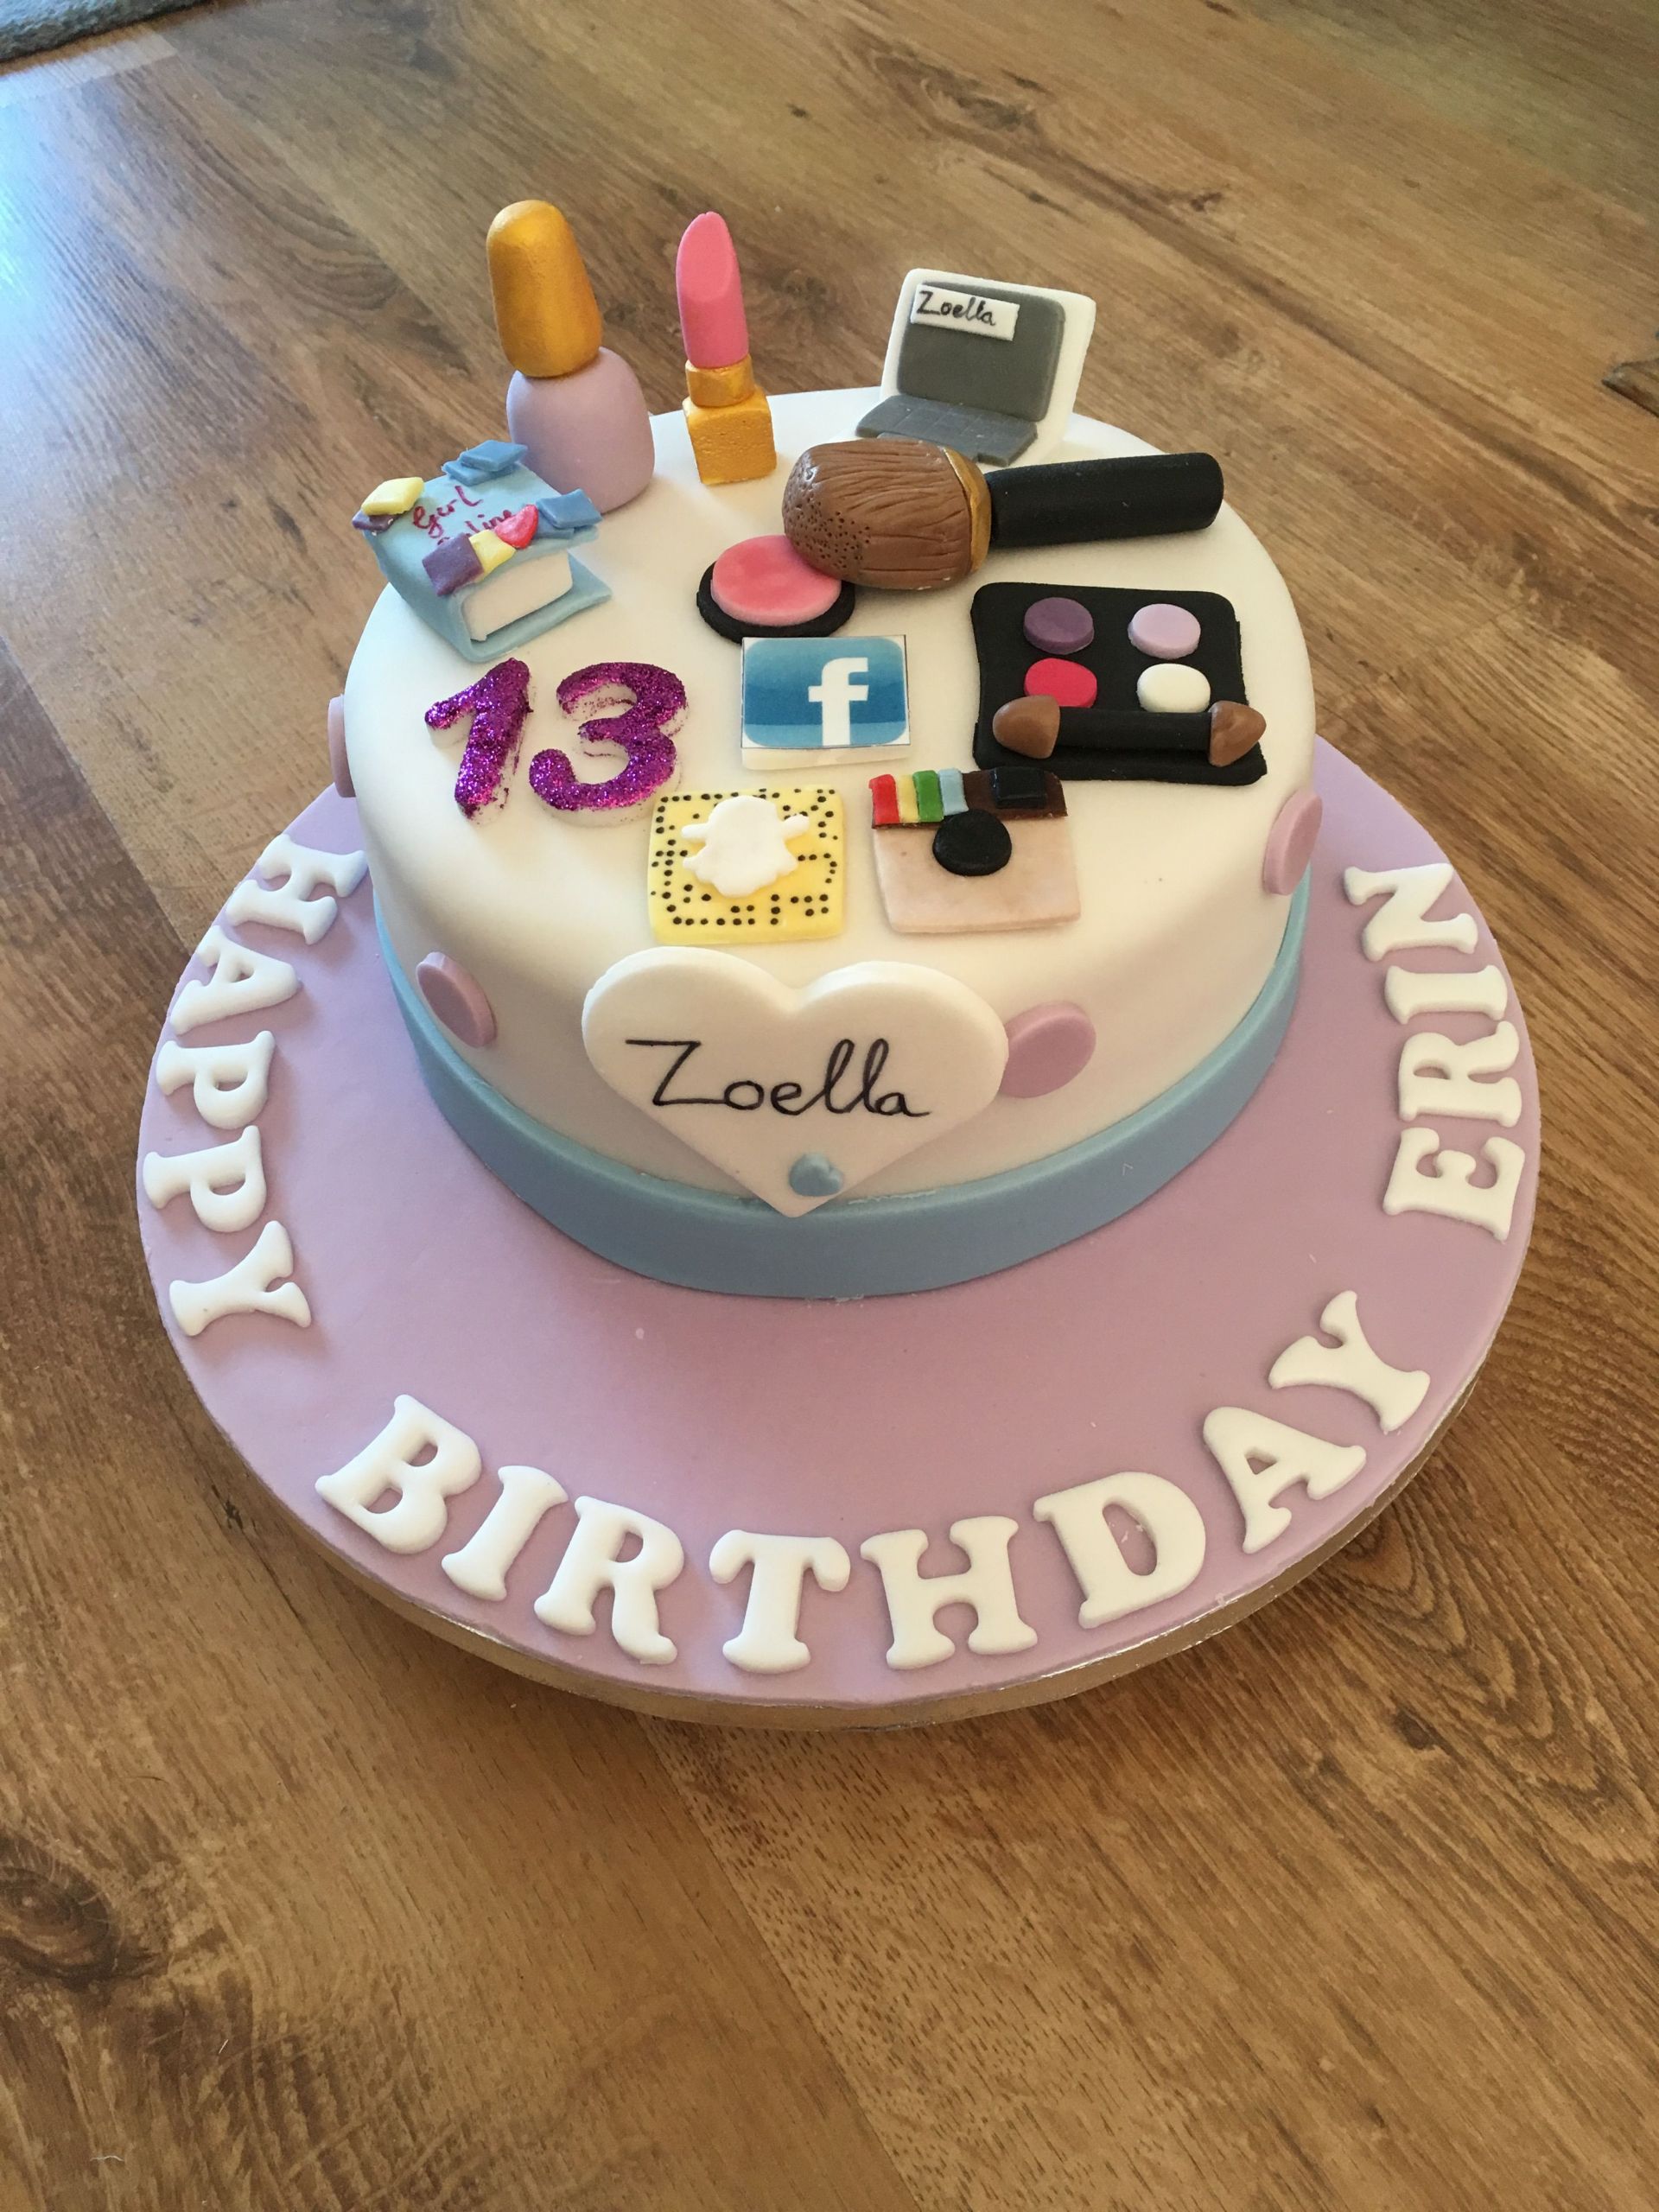 Birthday Party Ideas For 13 Year Olds
 Zoella theme birthday cake for 13 year old